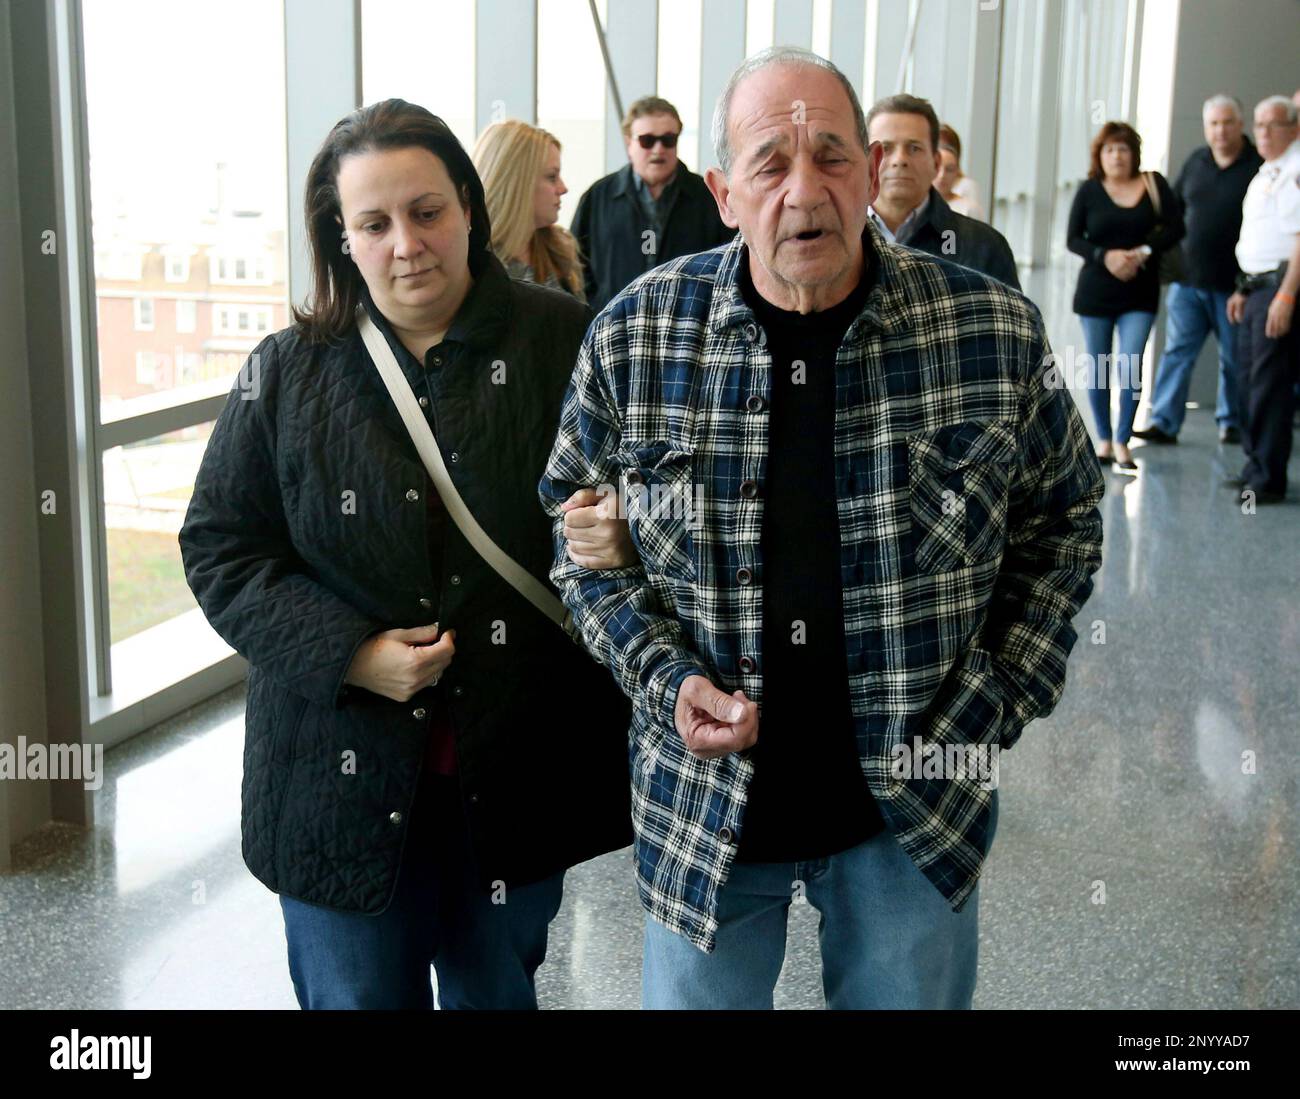 In this Thursday, May 4, 2017 photo, Roseann Rodriguez and Angelo Rodriguiez, the sister and father of the deceased Joseph Rodriguez, walk inside the Richmond Supreme Courthouse, in Staten Island, N.Y. Former New Jersey police officer Pedro Abad was convicted Thursday in a wrong-way crash that killed a fellow officer and Rodriguez in what prosecutors said was the result of extreme intoxication. (Ed Murray/NJ Advance Media via AP) Stock Photo